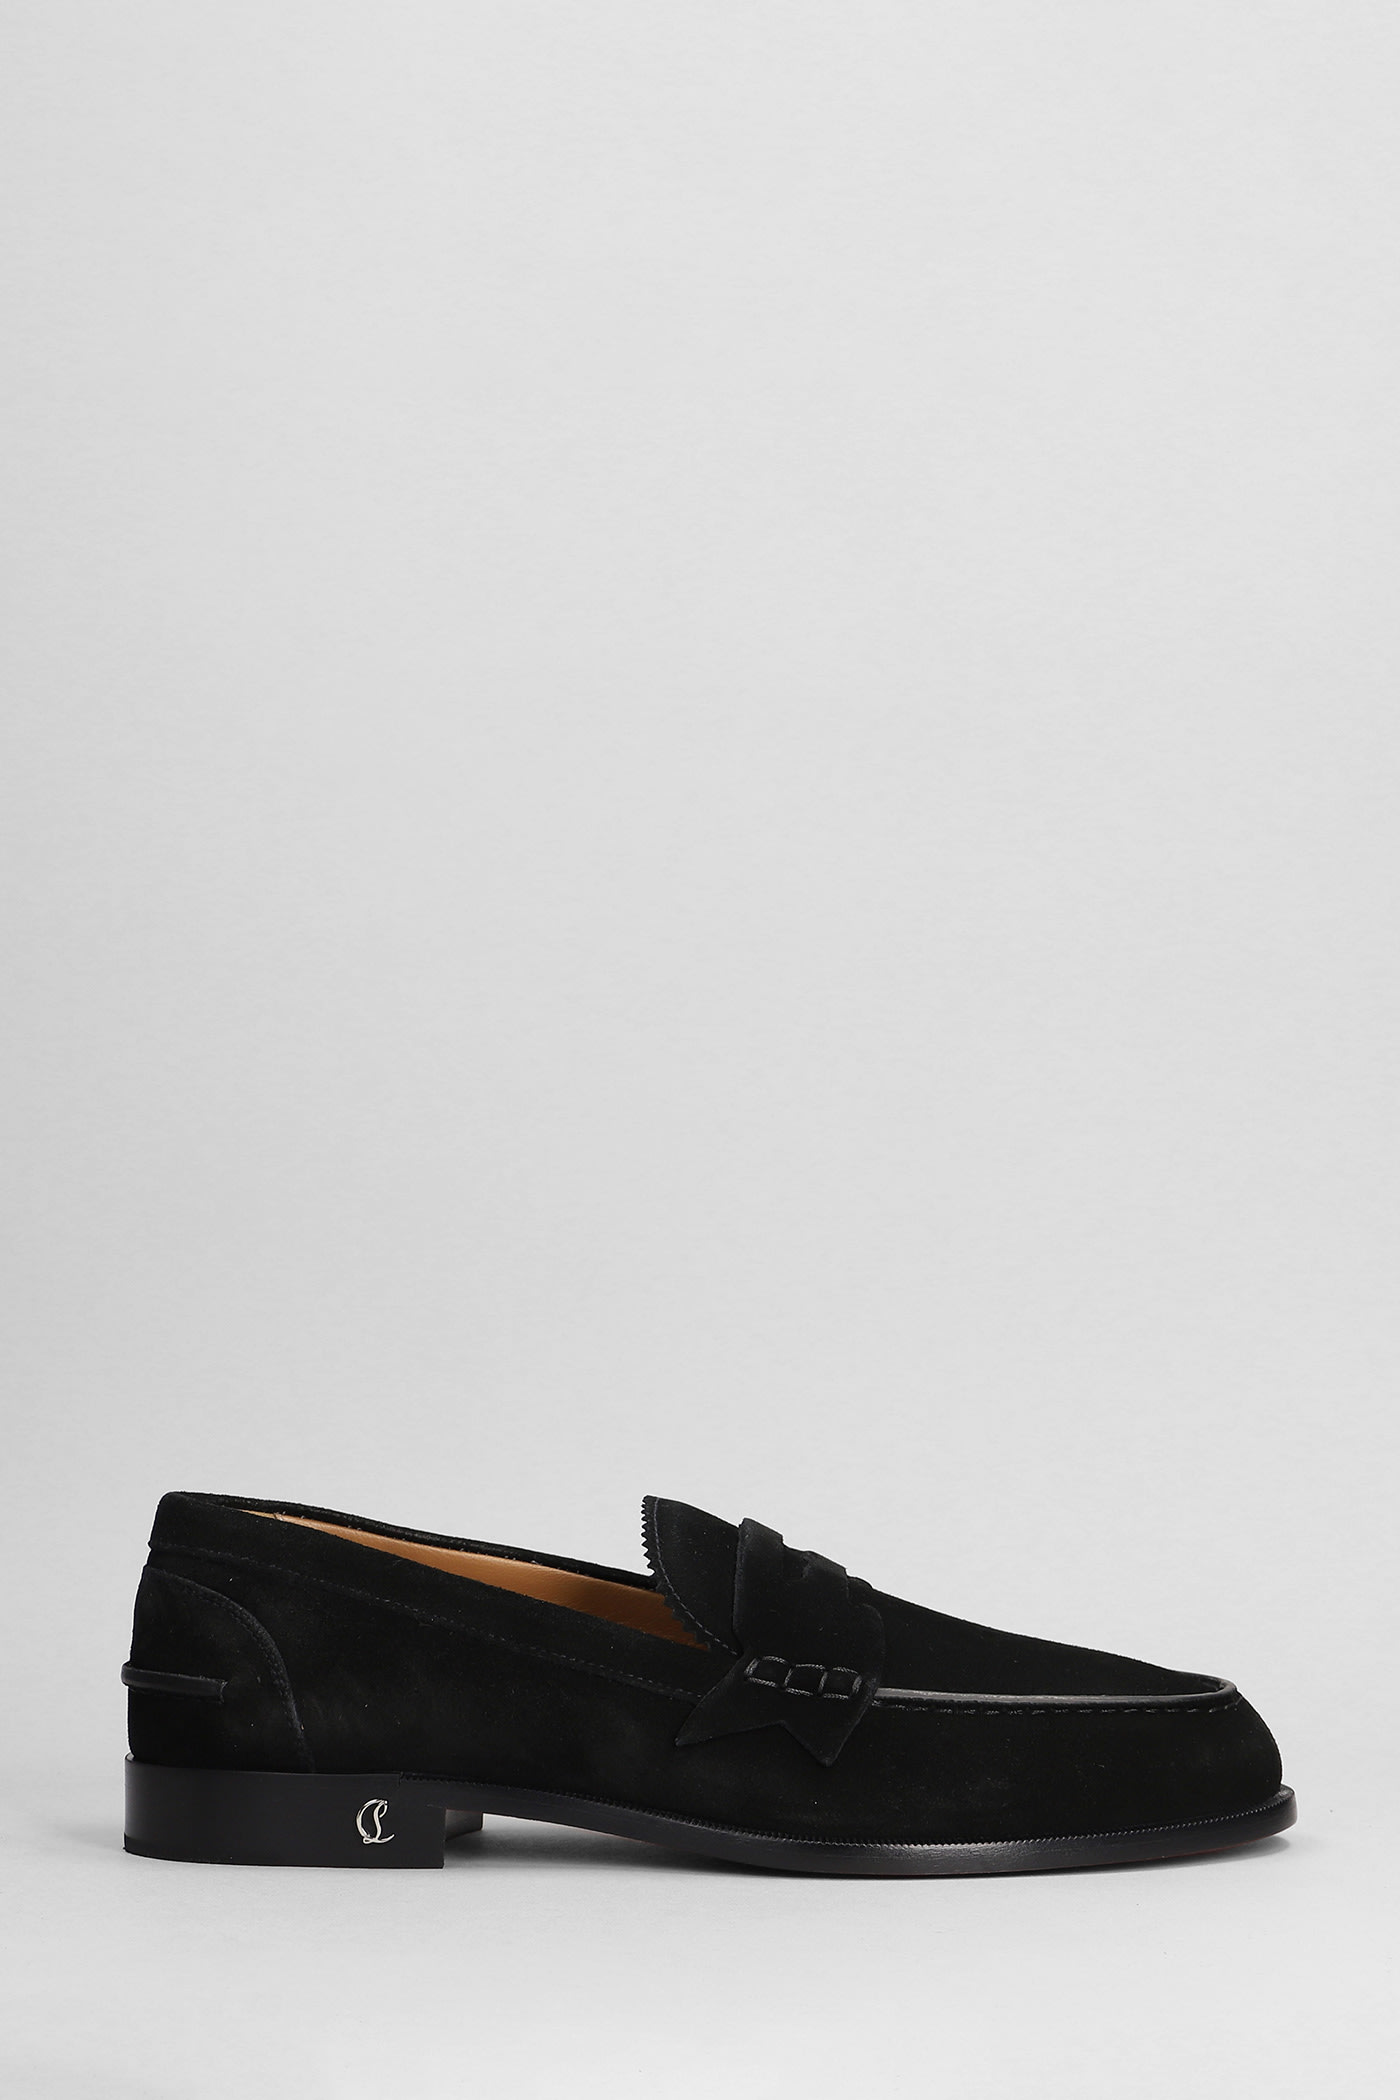 Christian Louboutin No Penny Loafers In Black Suede